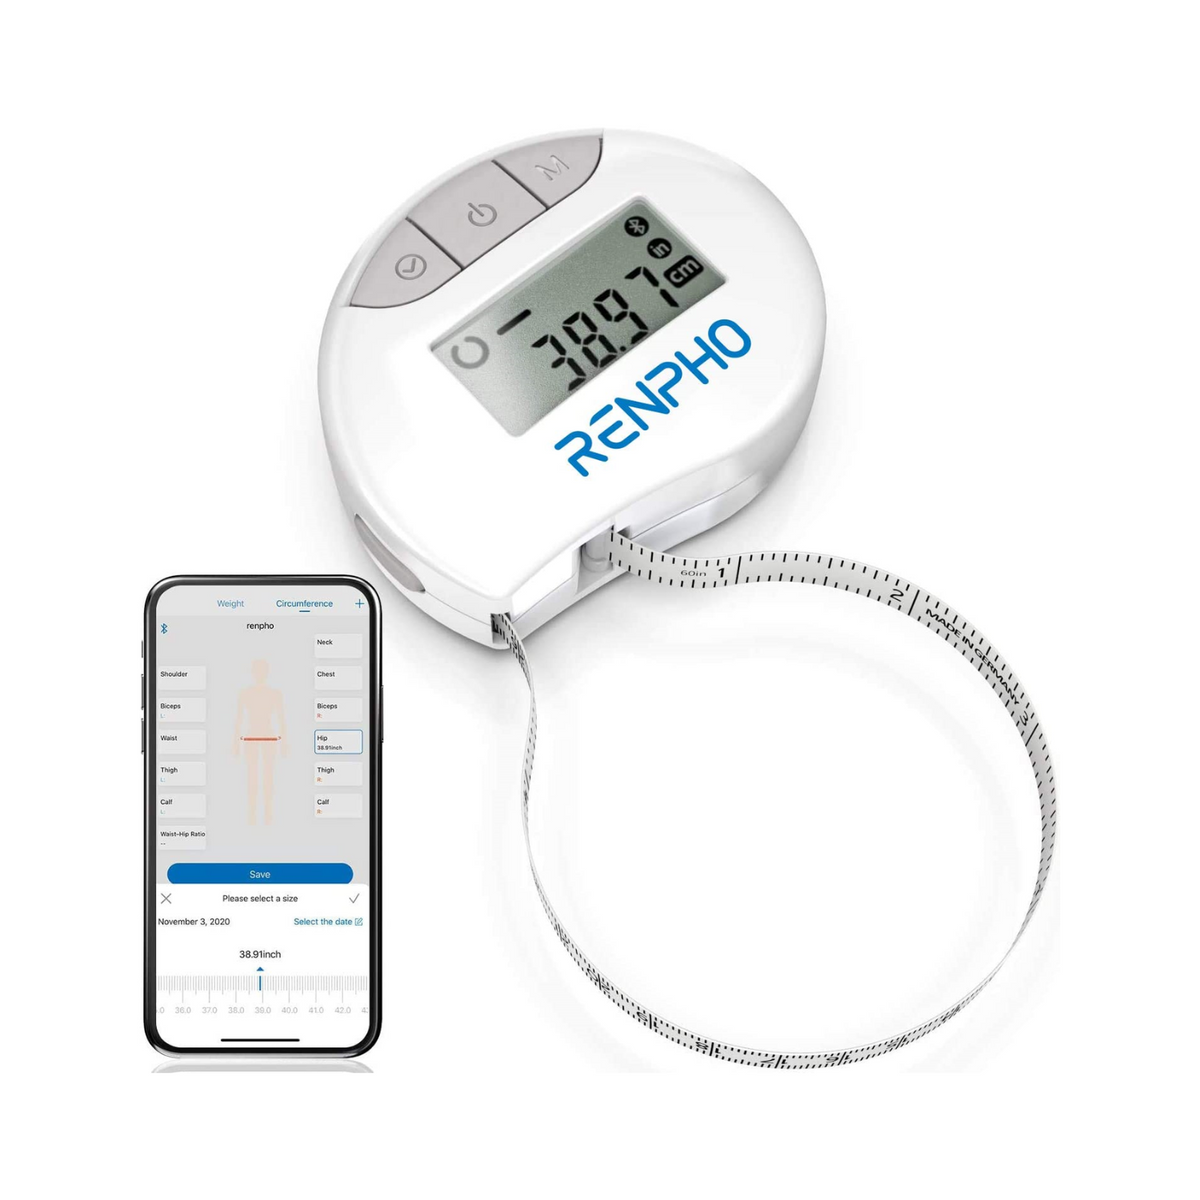 New Renpho Smart Tape Measure for body - health and beauty - by owner -  household sale - craigslist